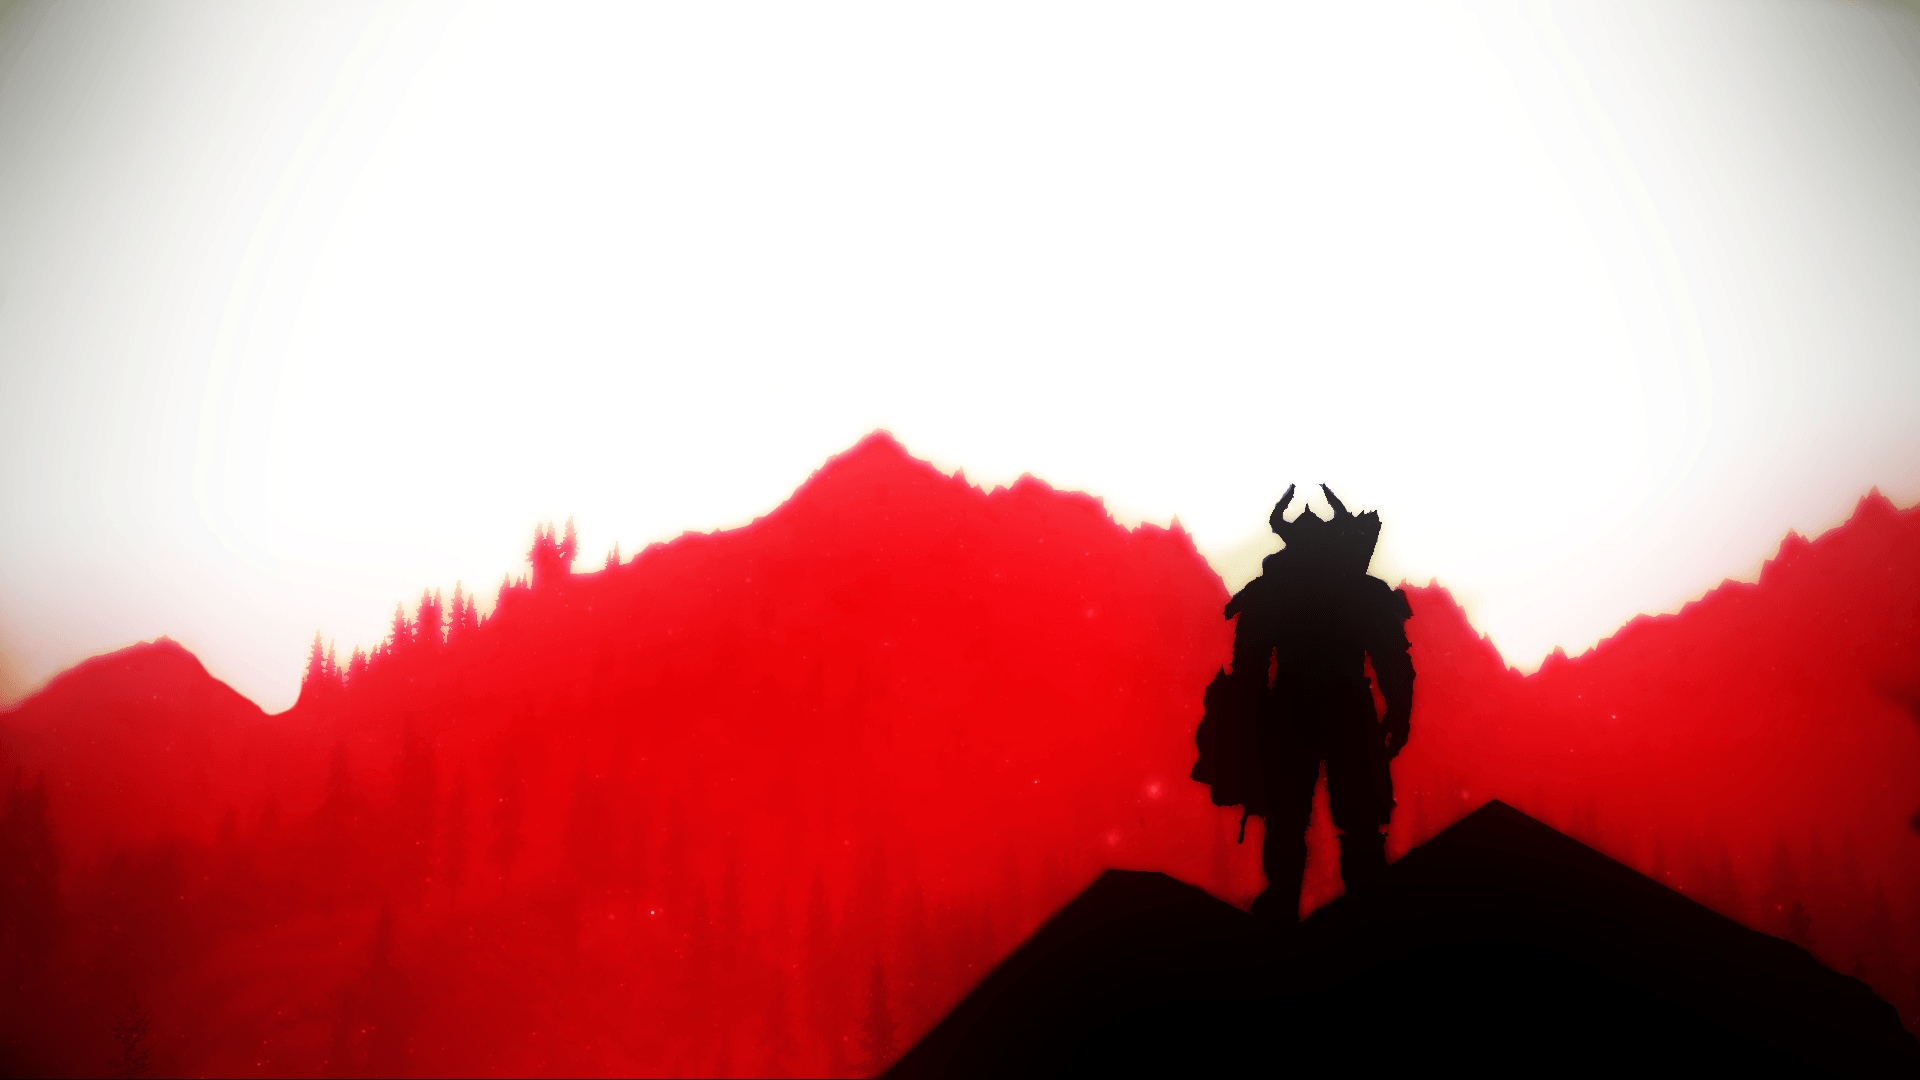 Another Skyrim wallpaper i made but went for something abit